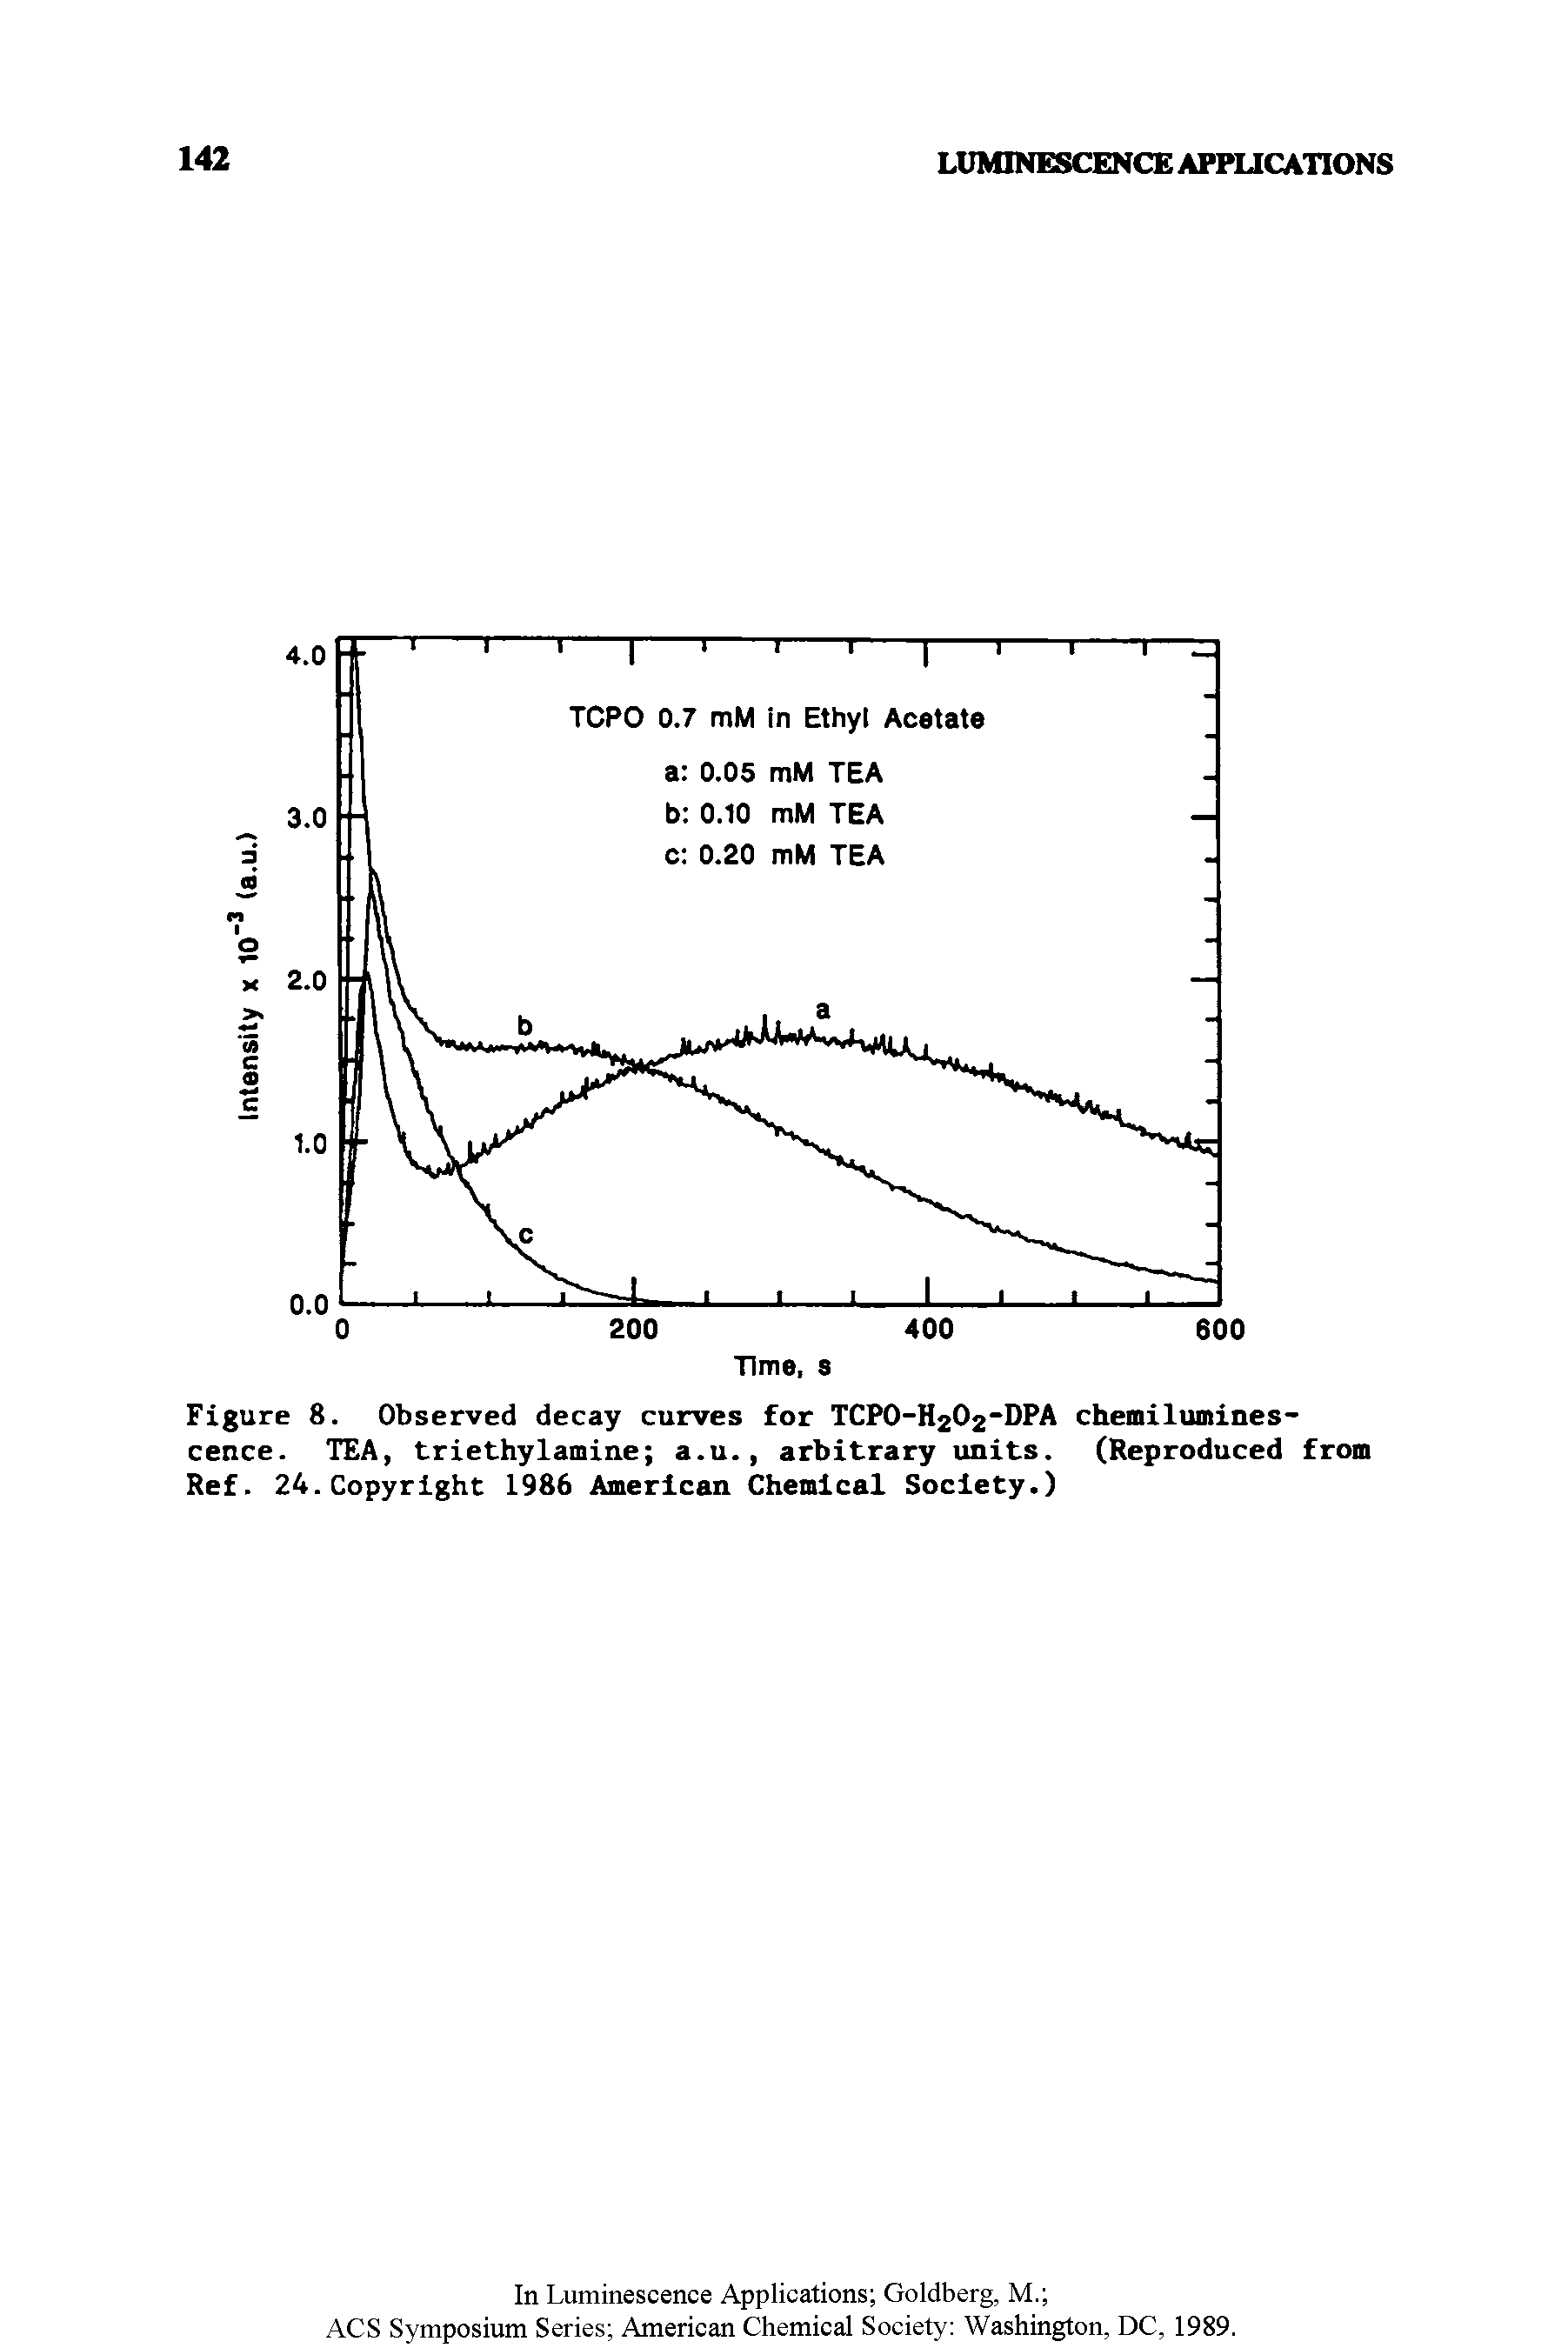 Figure 8. Observed decay curves for TCP0-H202"DPA chemiluminescence. TEA, triethylamine a.u., arbitrary units. (Reproduced from Ref. 24.Copyright 1986 American Chemical Society.)...